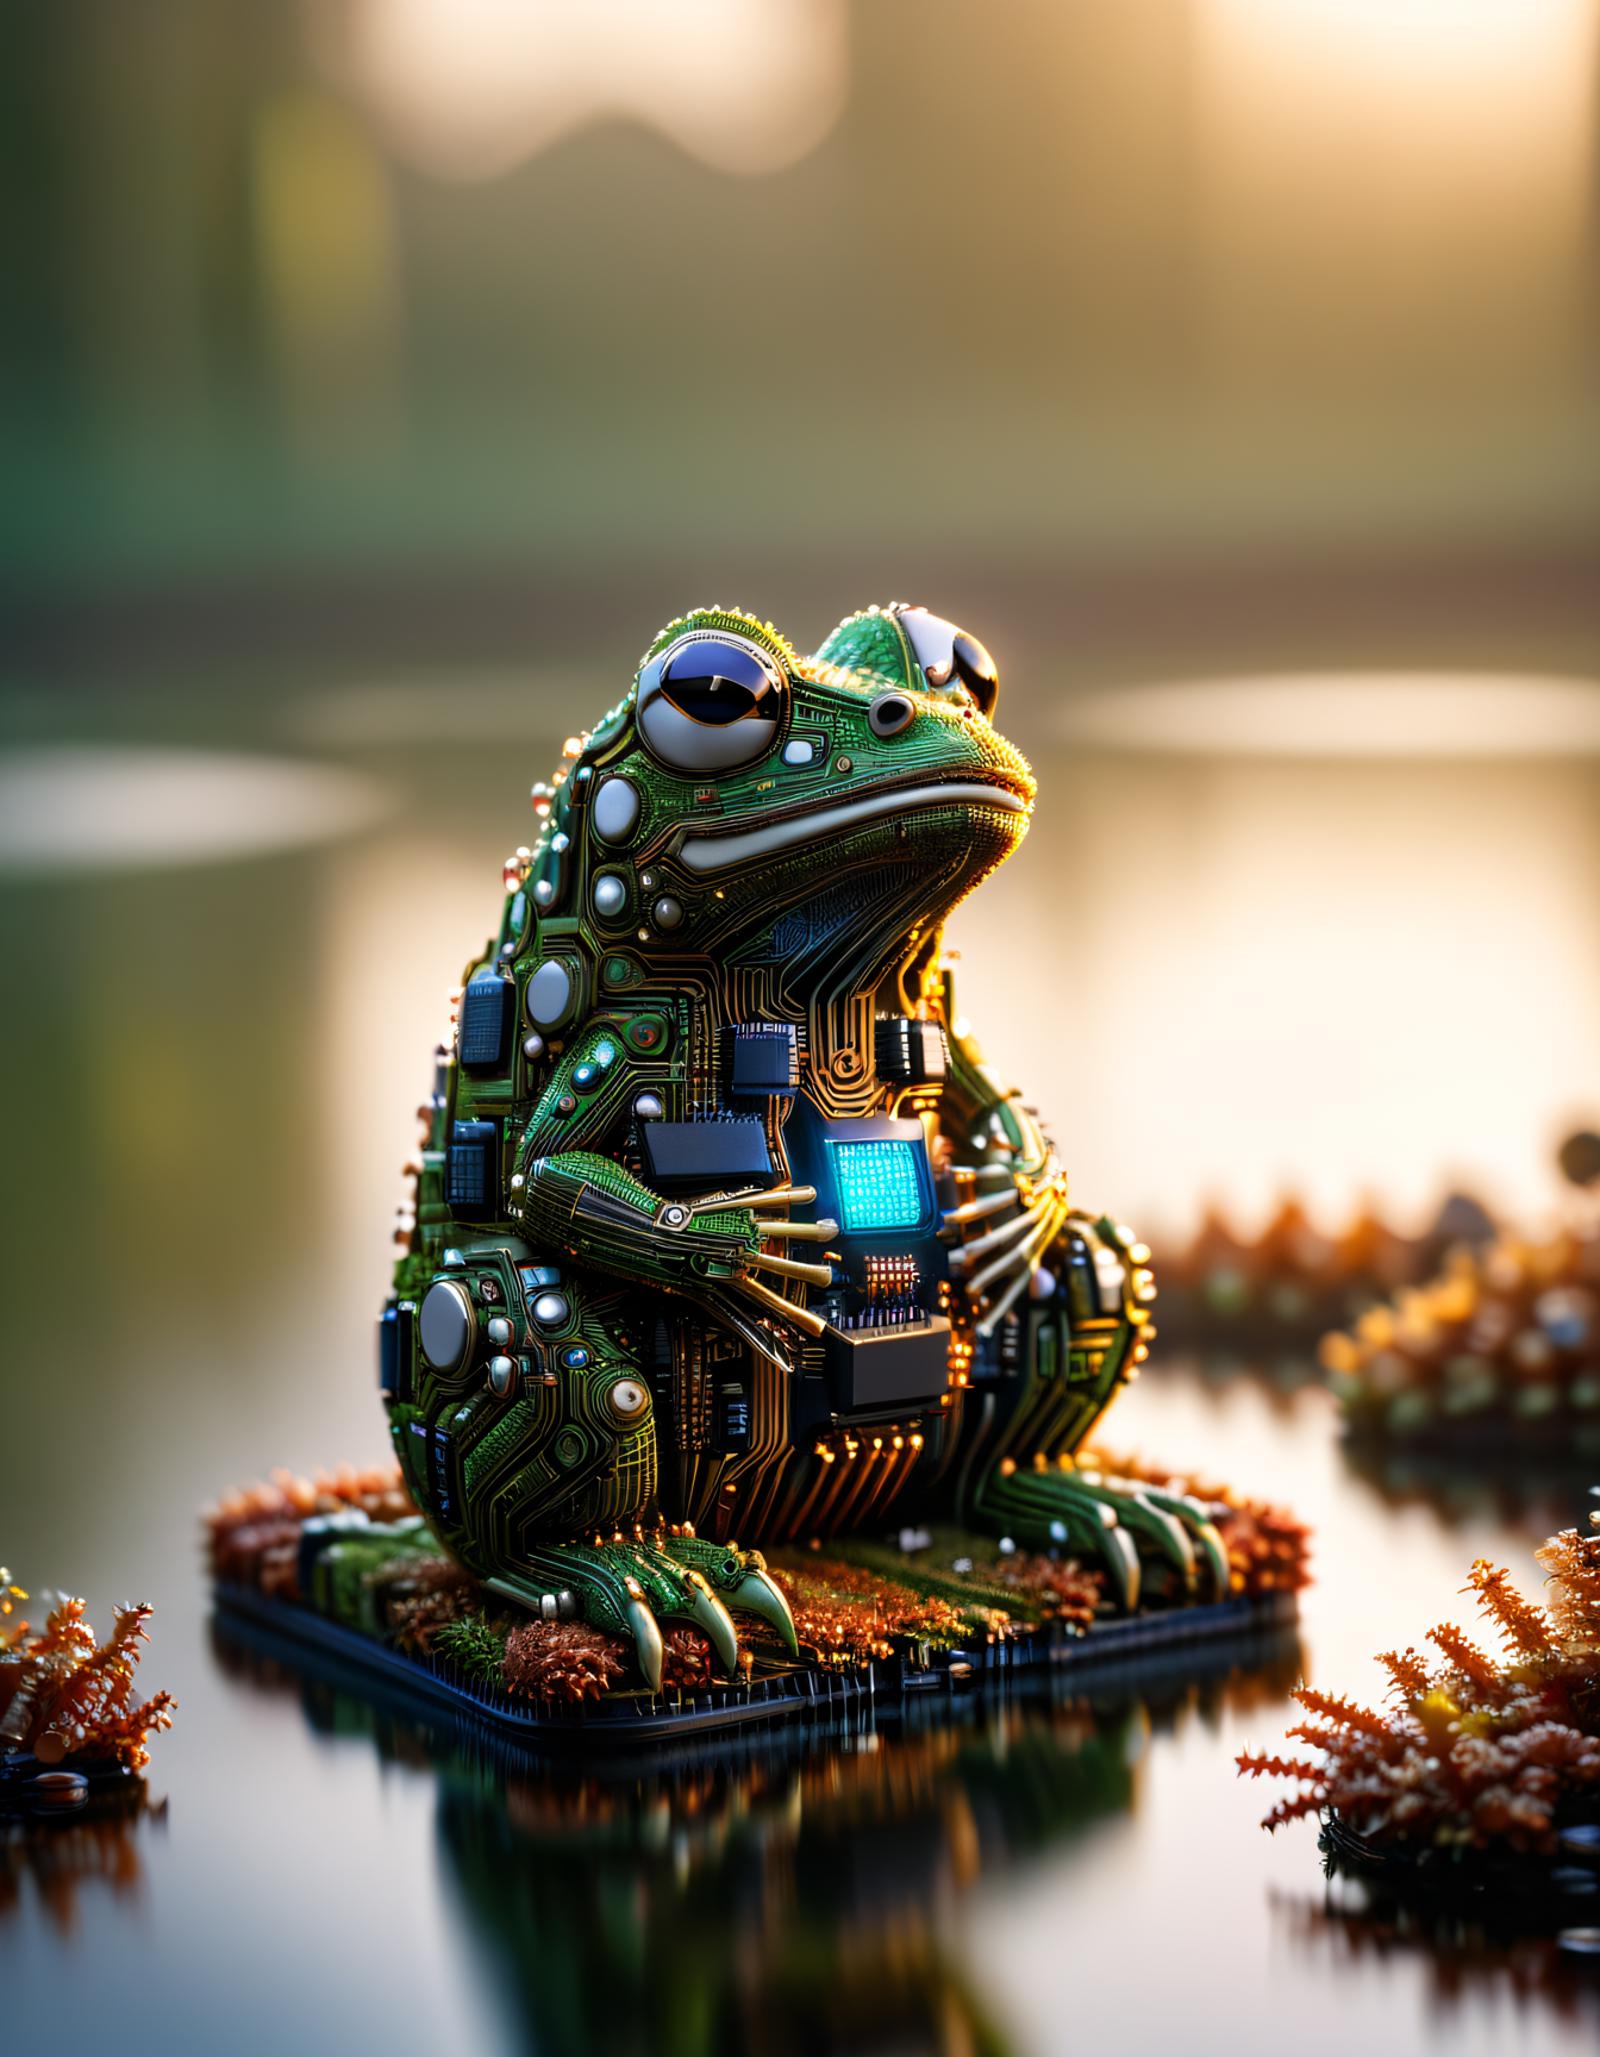 A green frog with a computer circuit board on its back, sitting on a mossy surface.